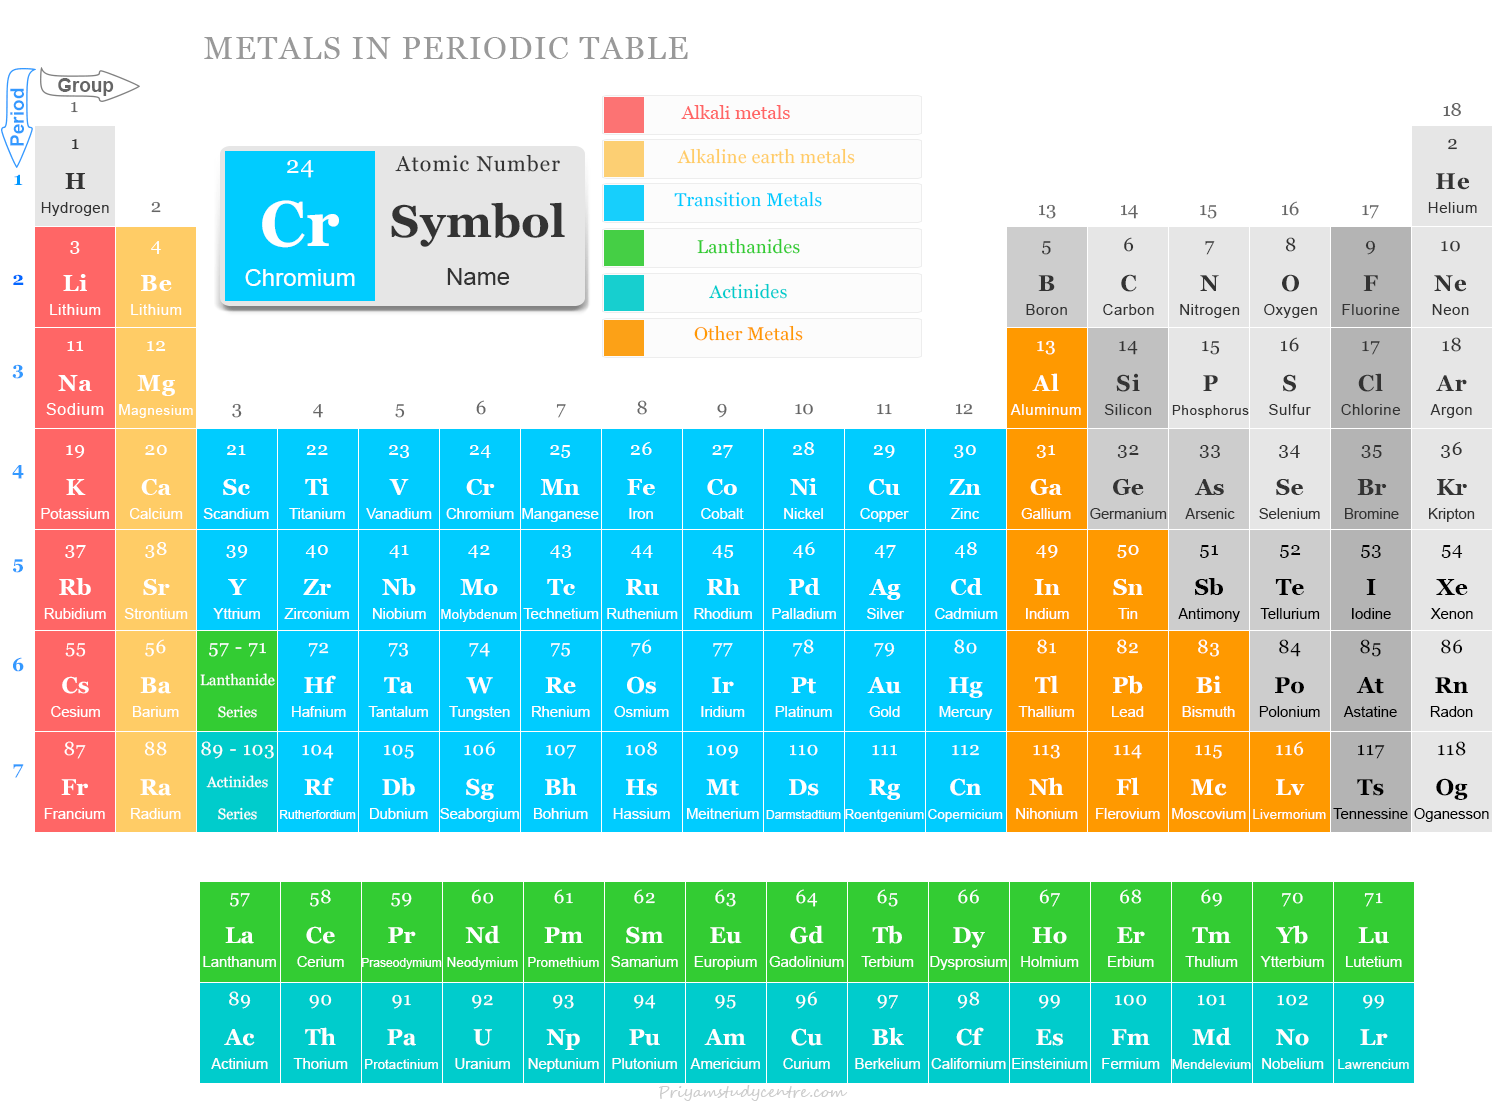 Metals (name, symbol, atomic number) on the periodic table